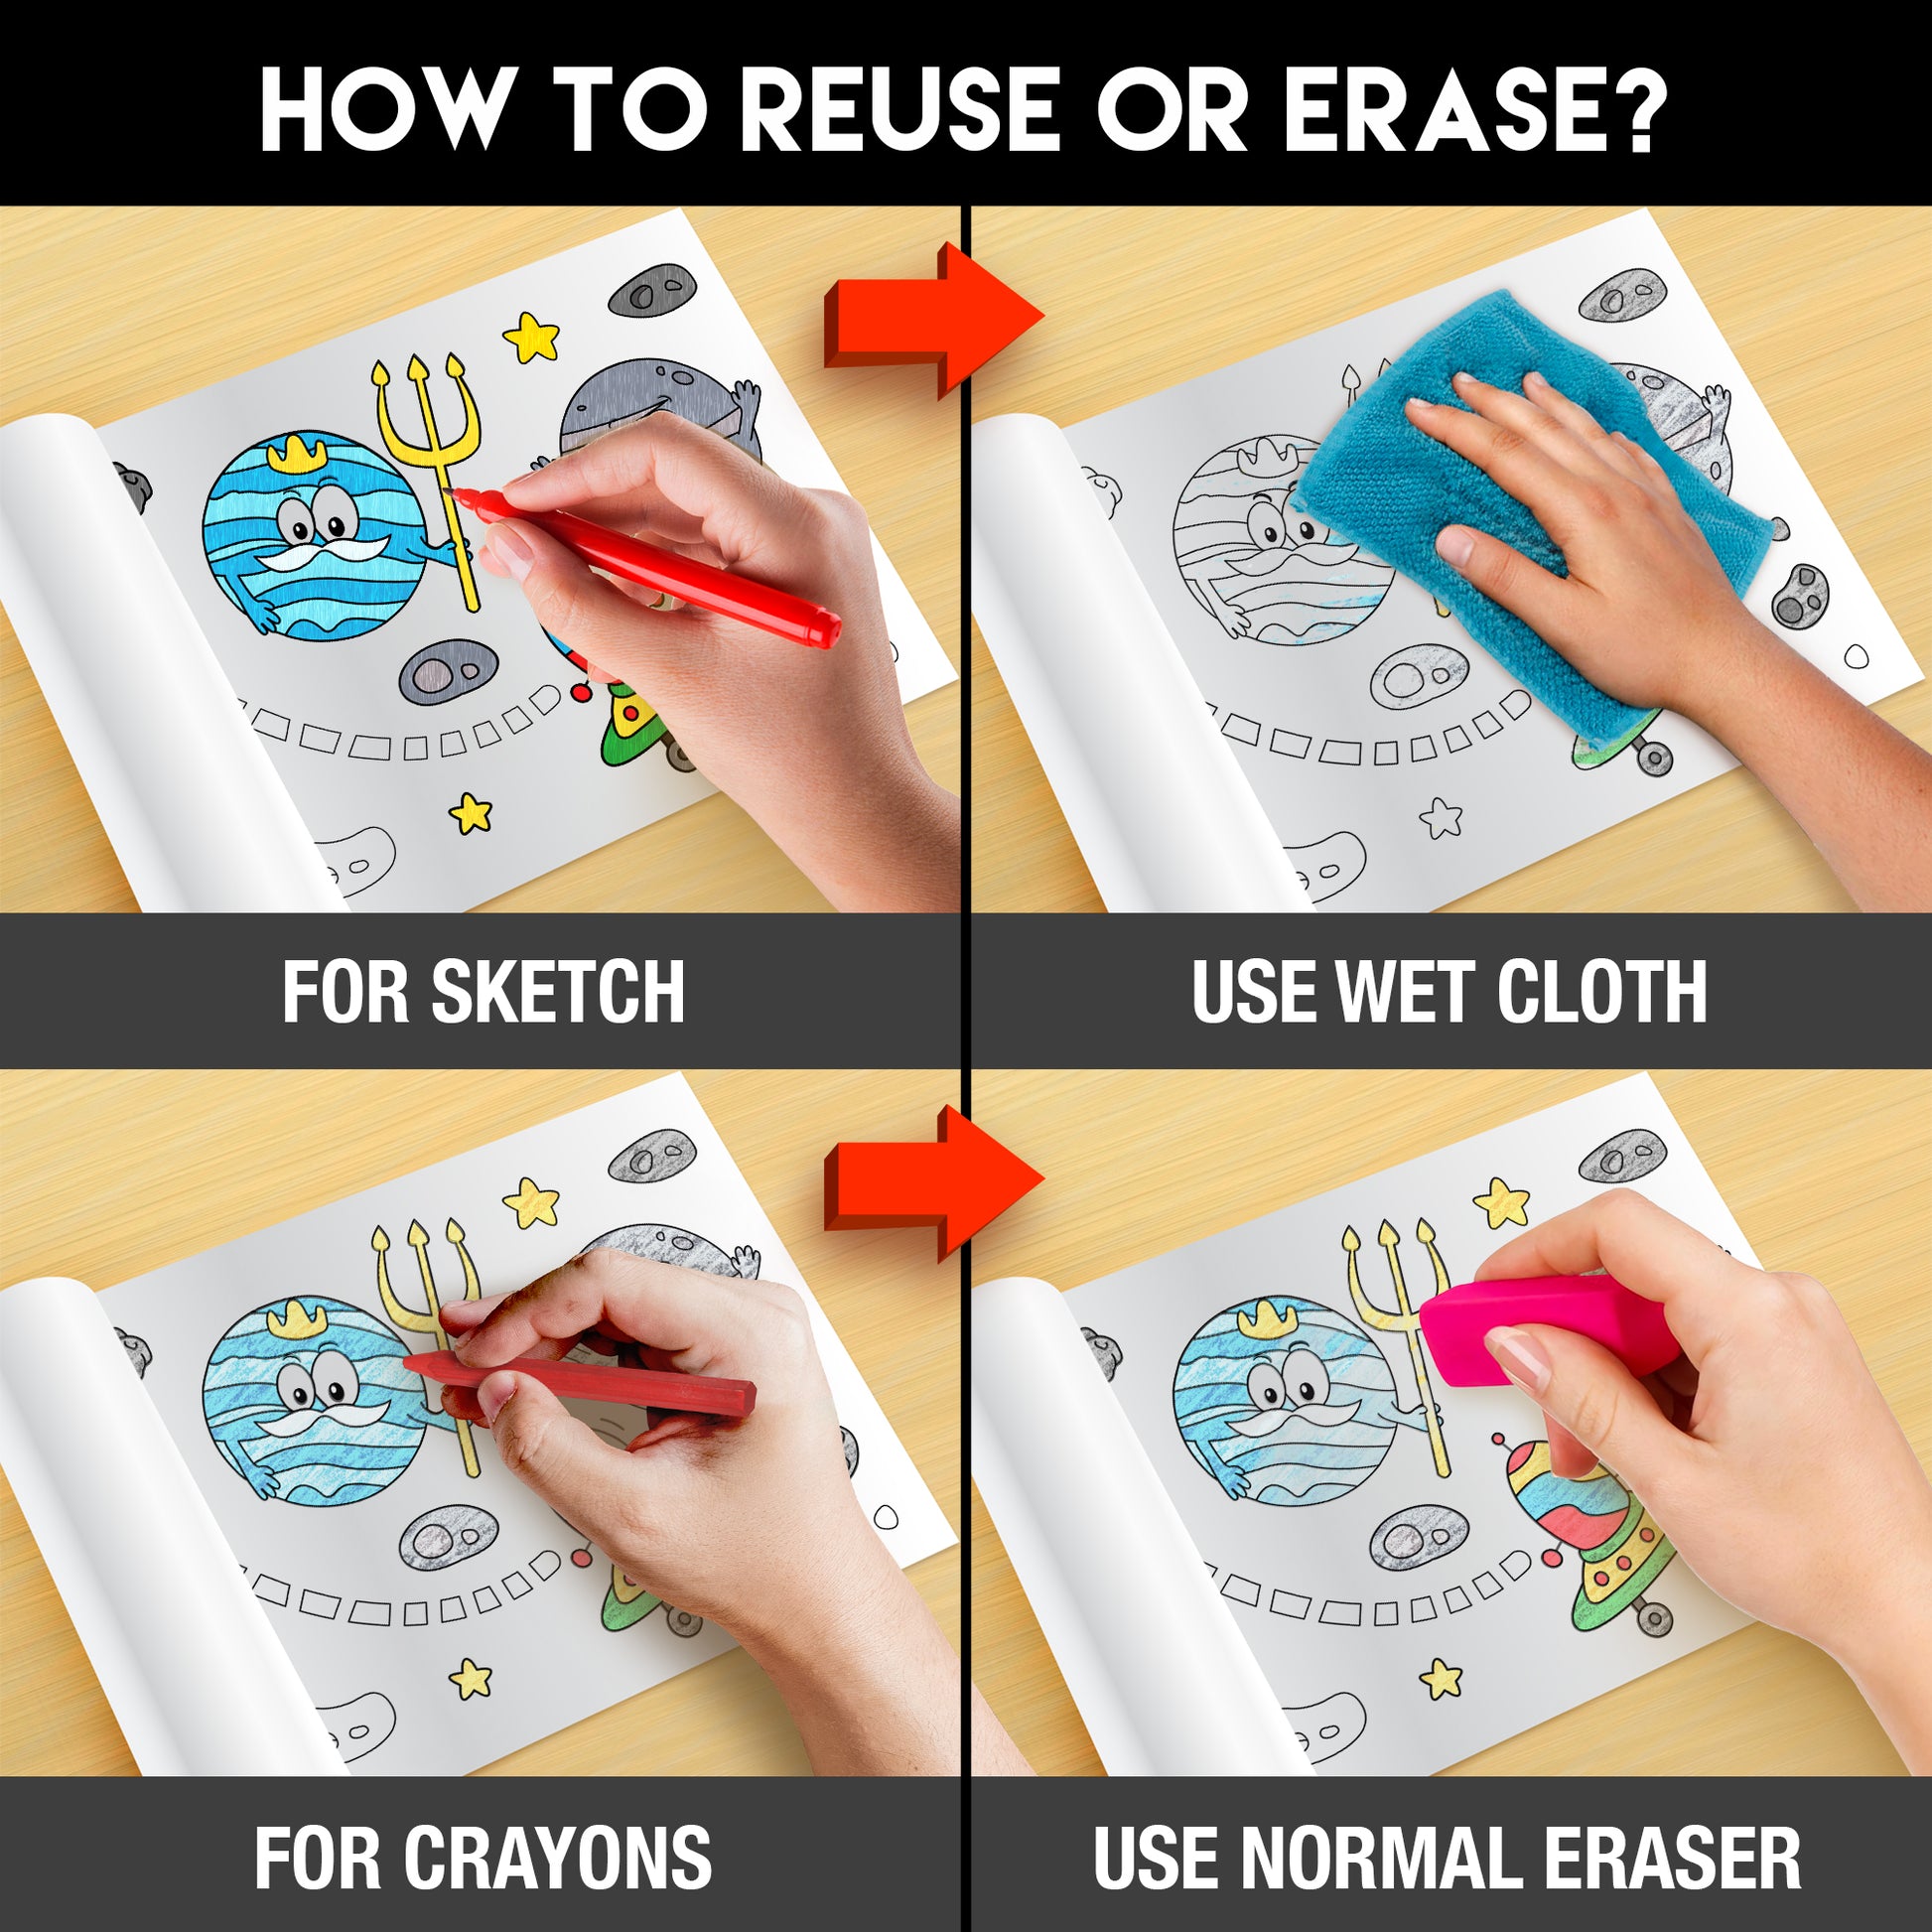 The image has a black background with four pictures demonstrating how to reuse or erase: the first picture depicts sketching on the sheet, the second shows using a wet cloth to remove sketches, the third image displays crayons colouring on the sheet, and the fourth image illustrates erasing crayons with a regular eraser.